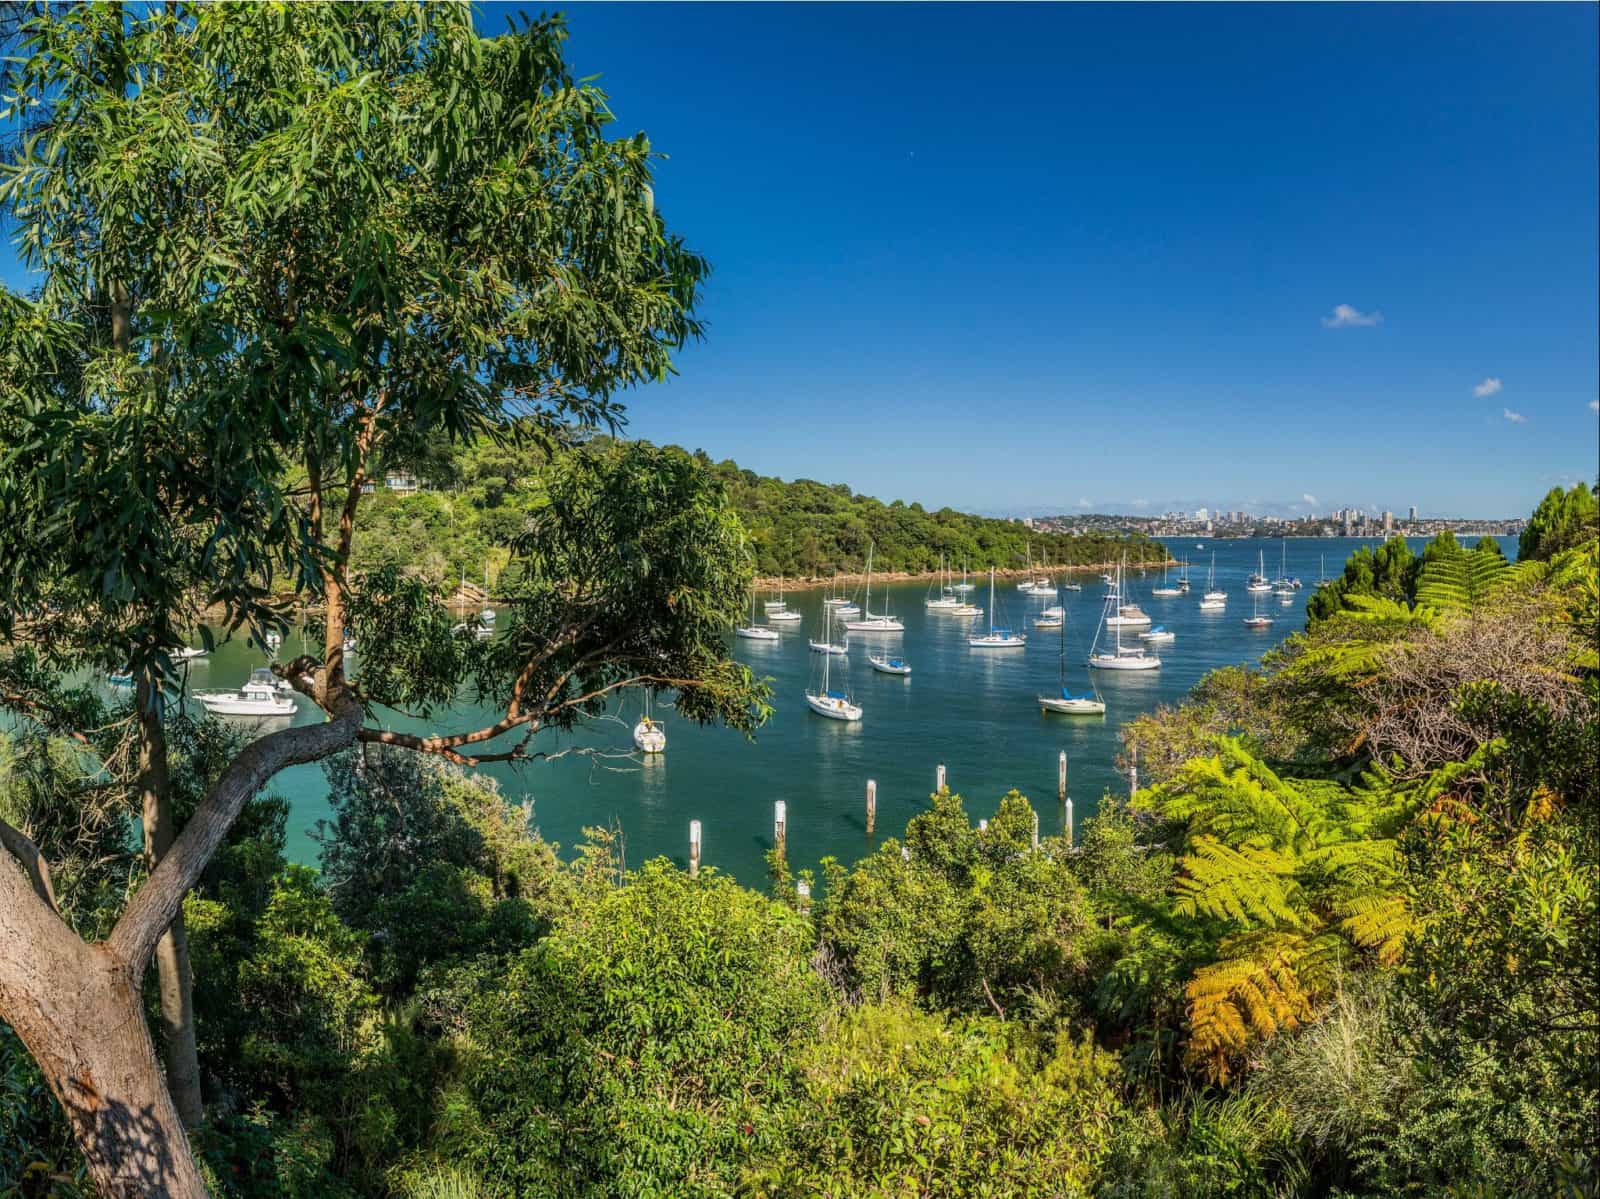 Boats docked in Little Sirius Cove, Mosman